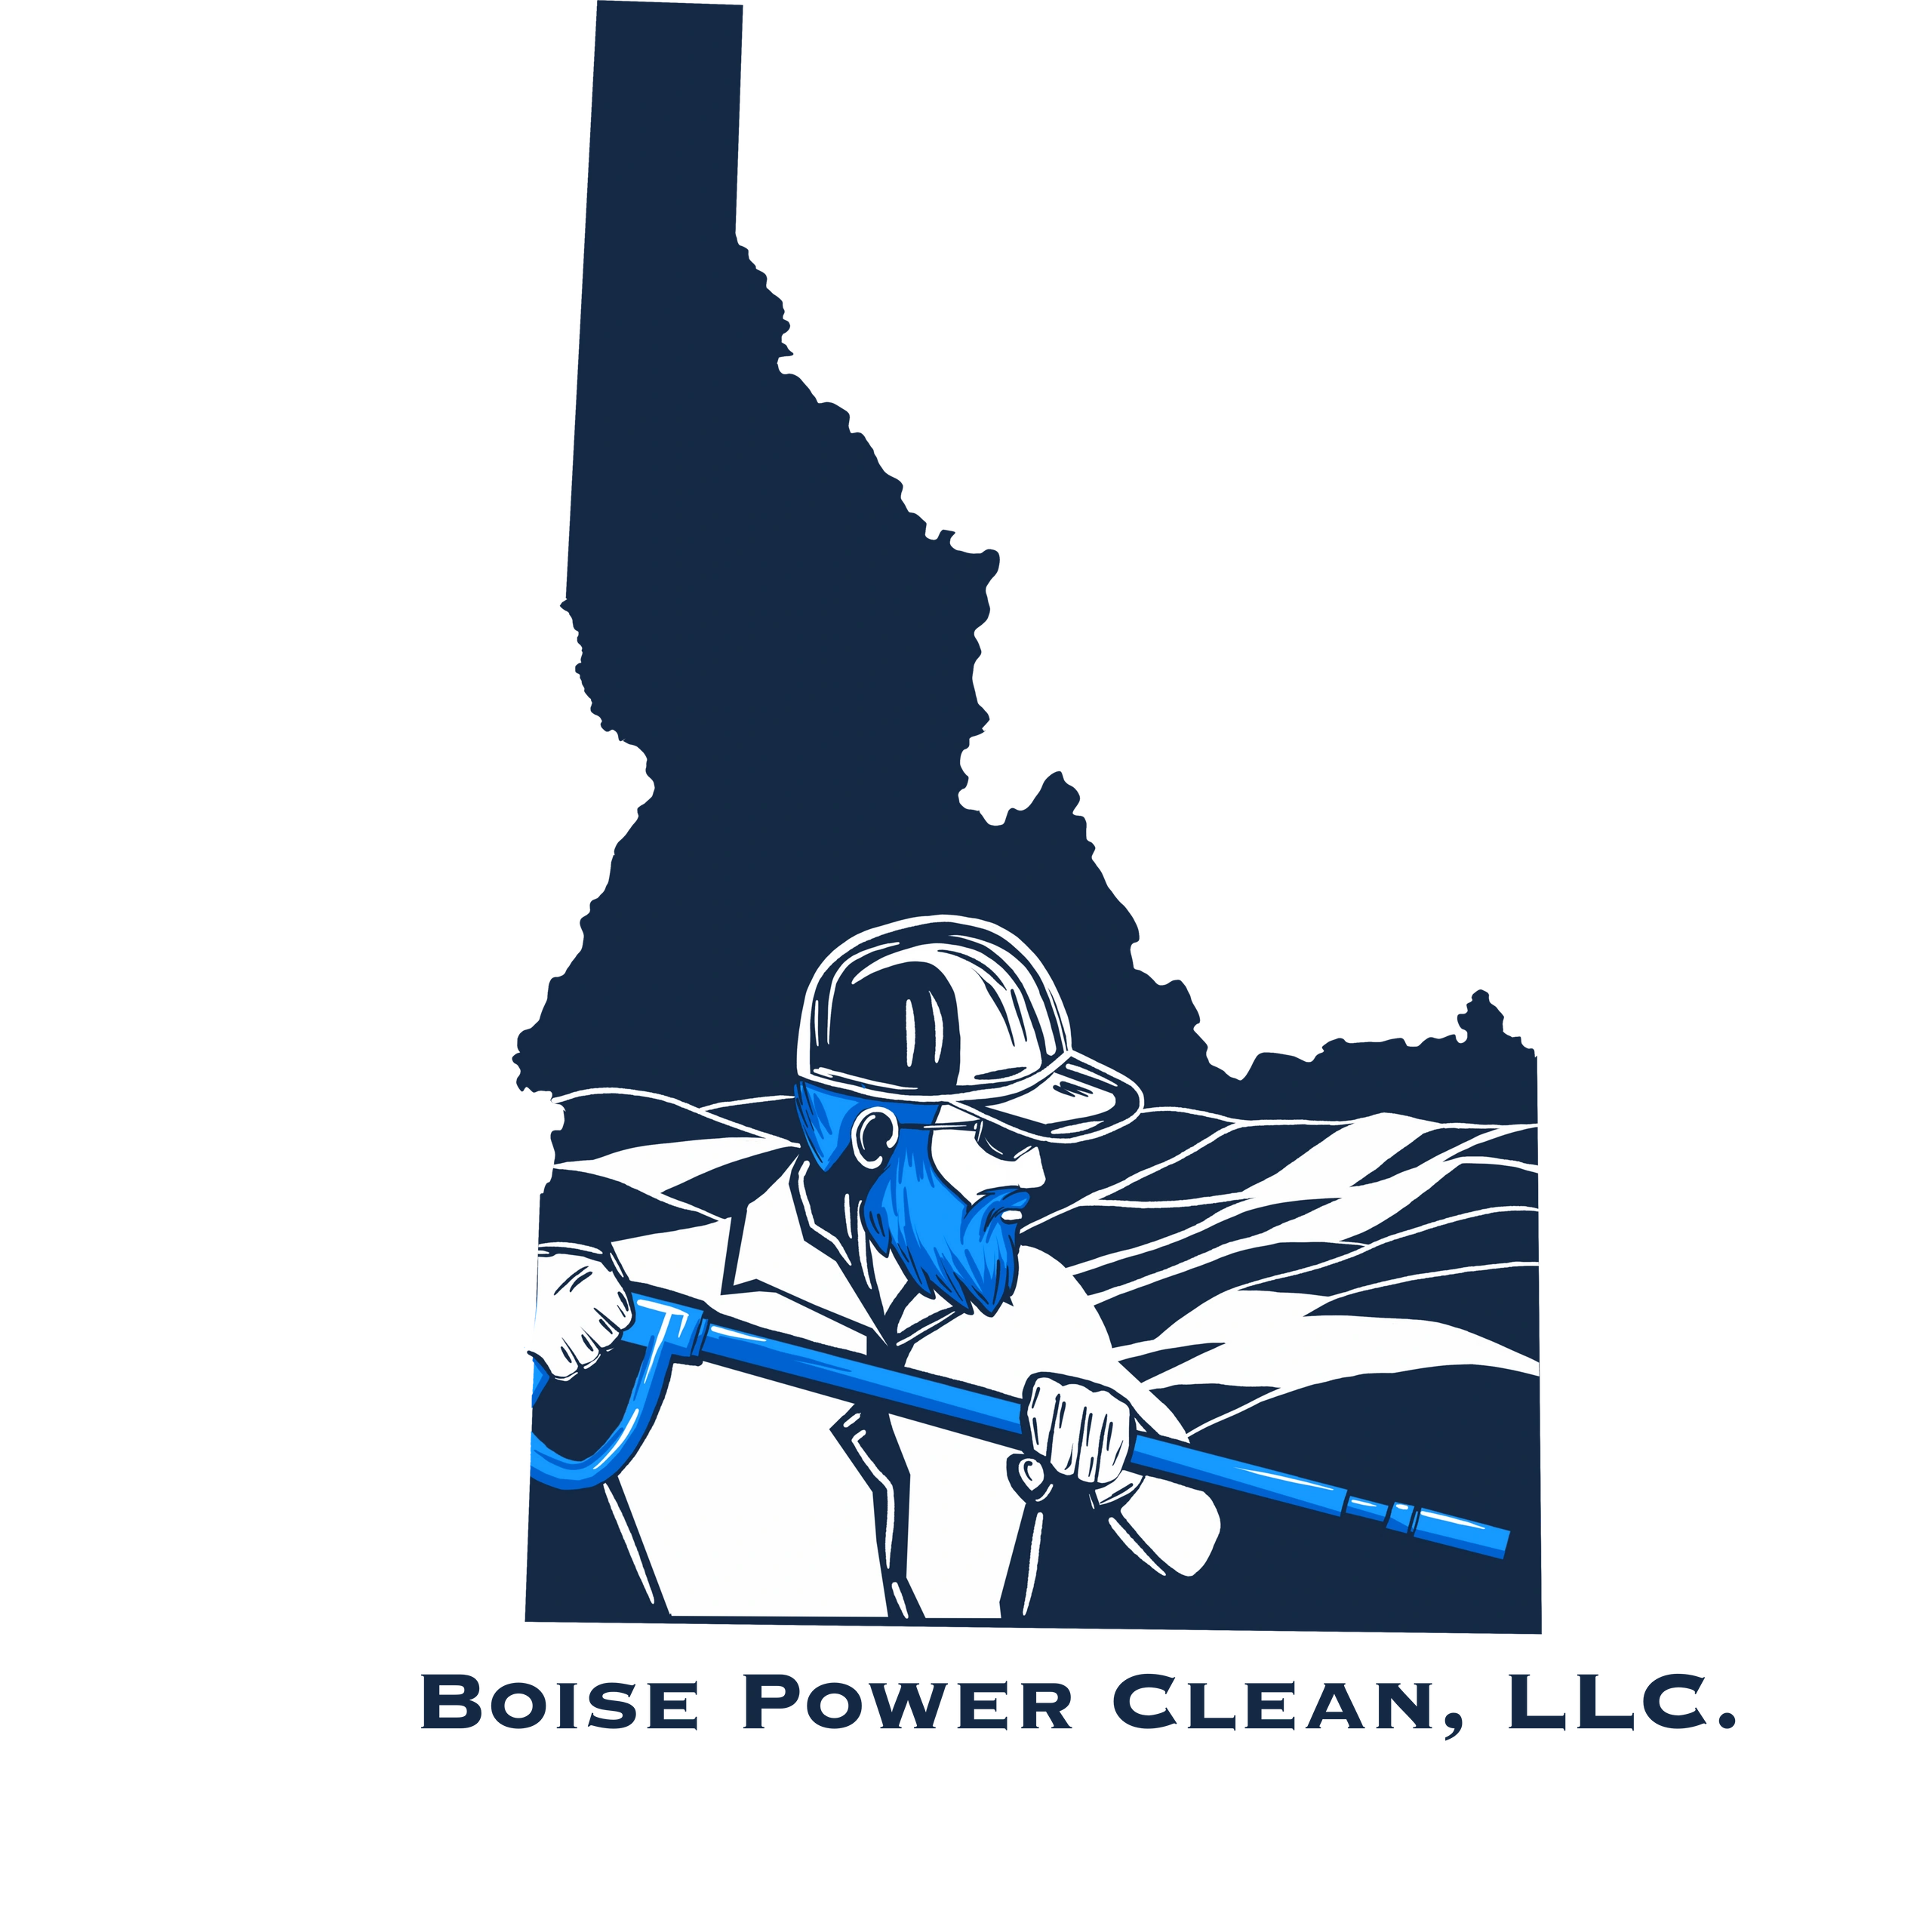 Boise Power Clean, Power Washing & Exterior Cleaning